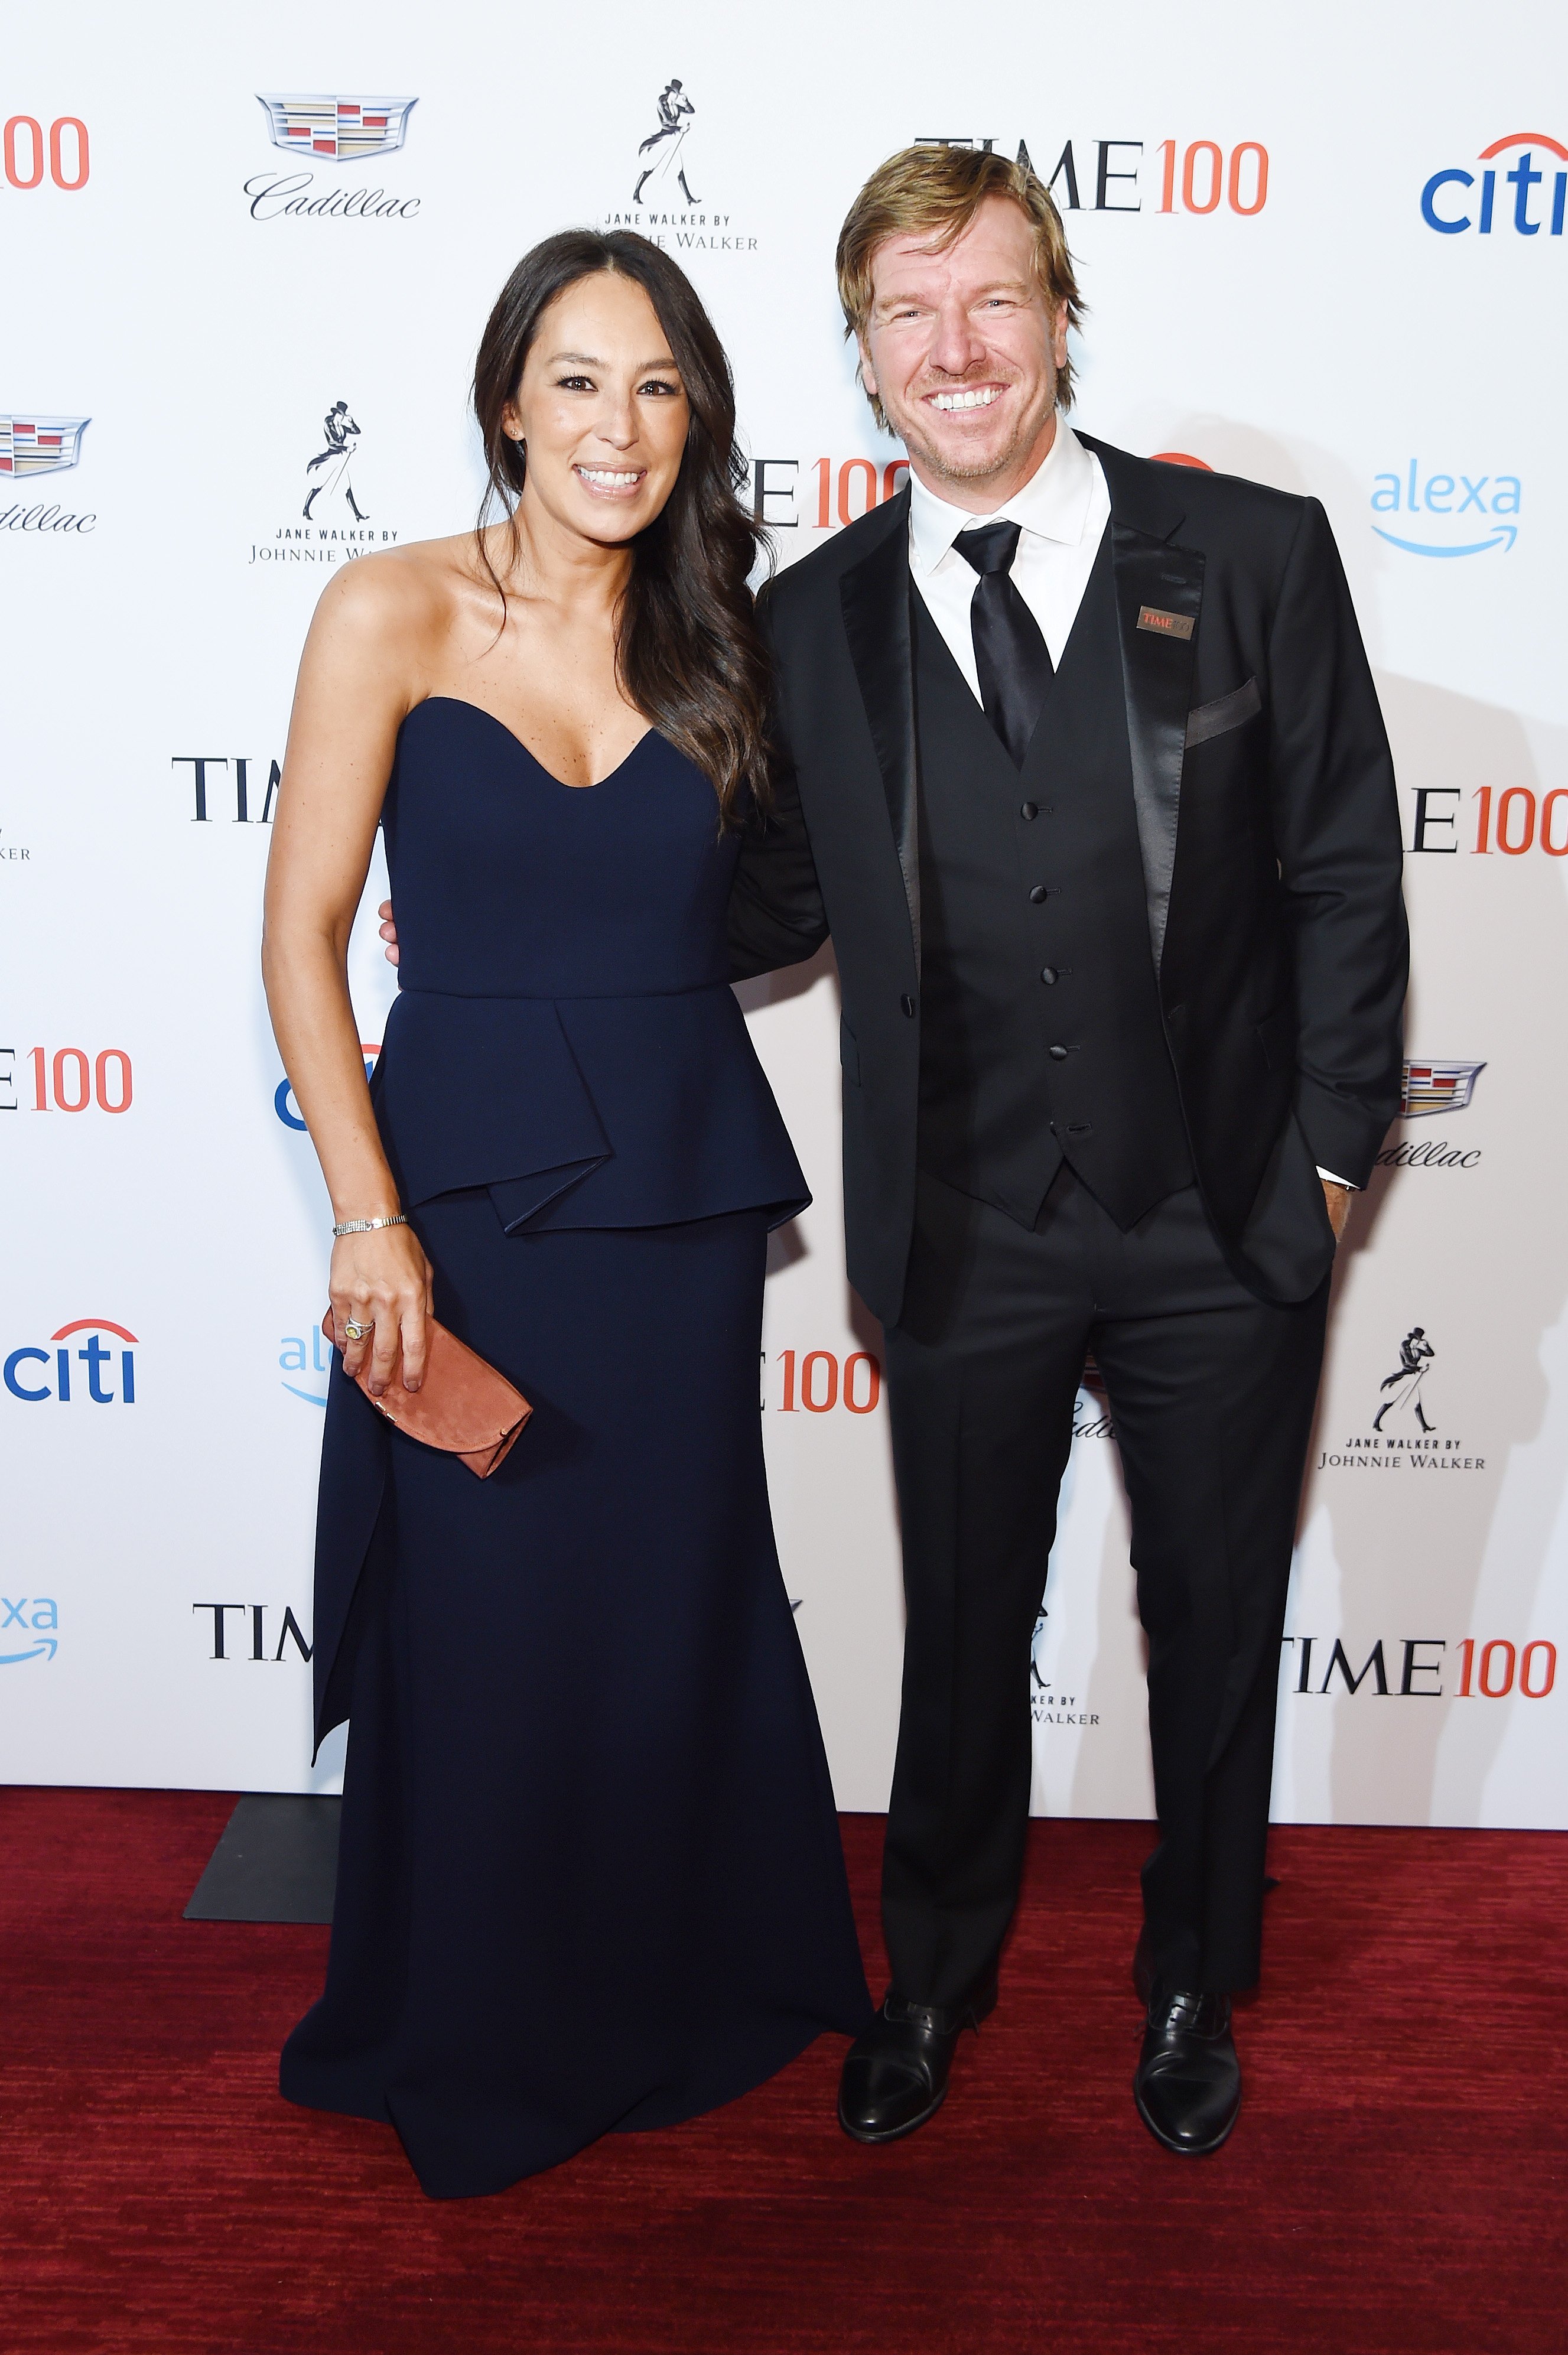 Joanna Gaines and Chip Gaines attend the TIME 100 Gala 2019 Cocktails at Jazz at Lincoln Center on April 23, 2019 in New York City | Photo: GettyImages